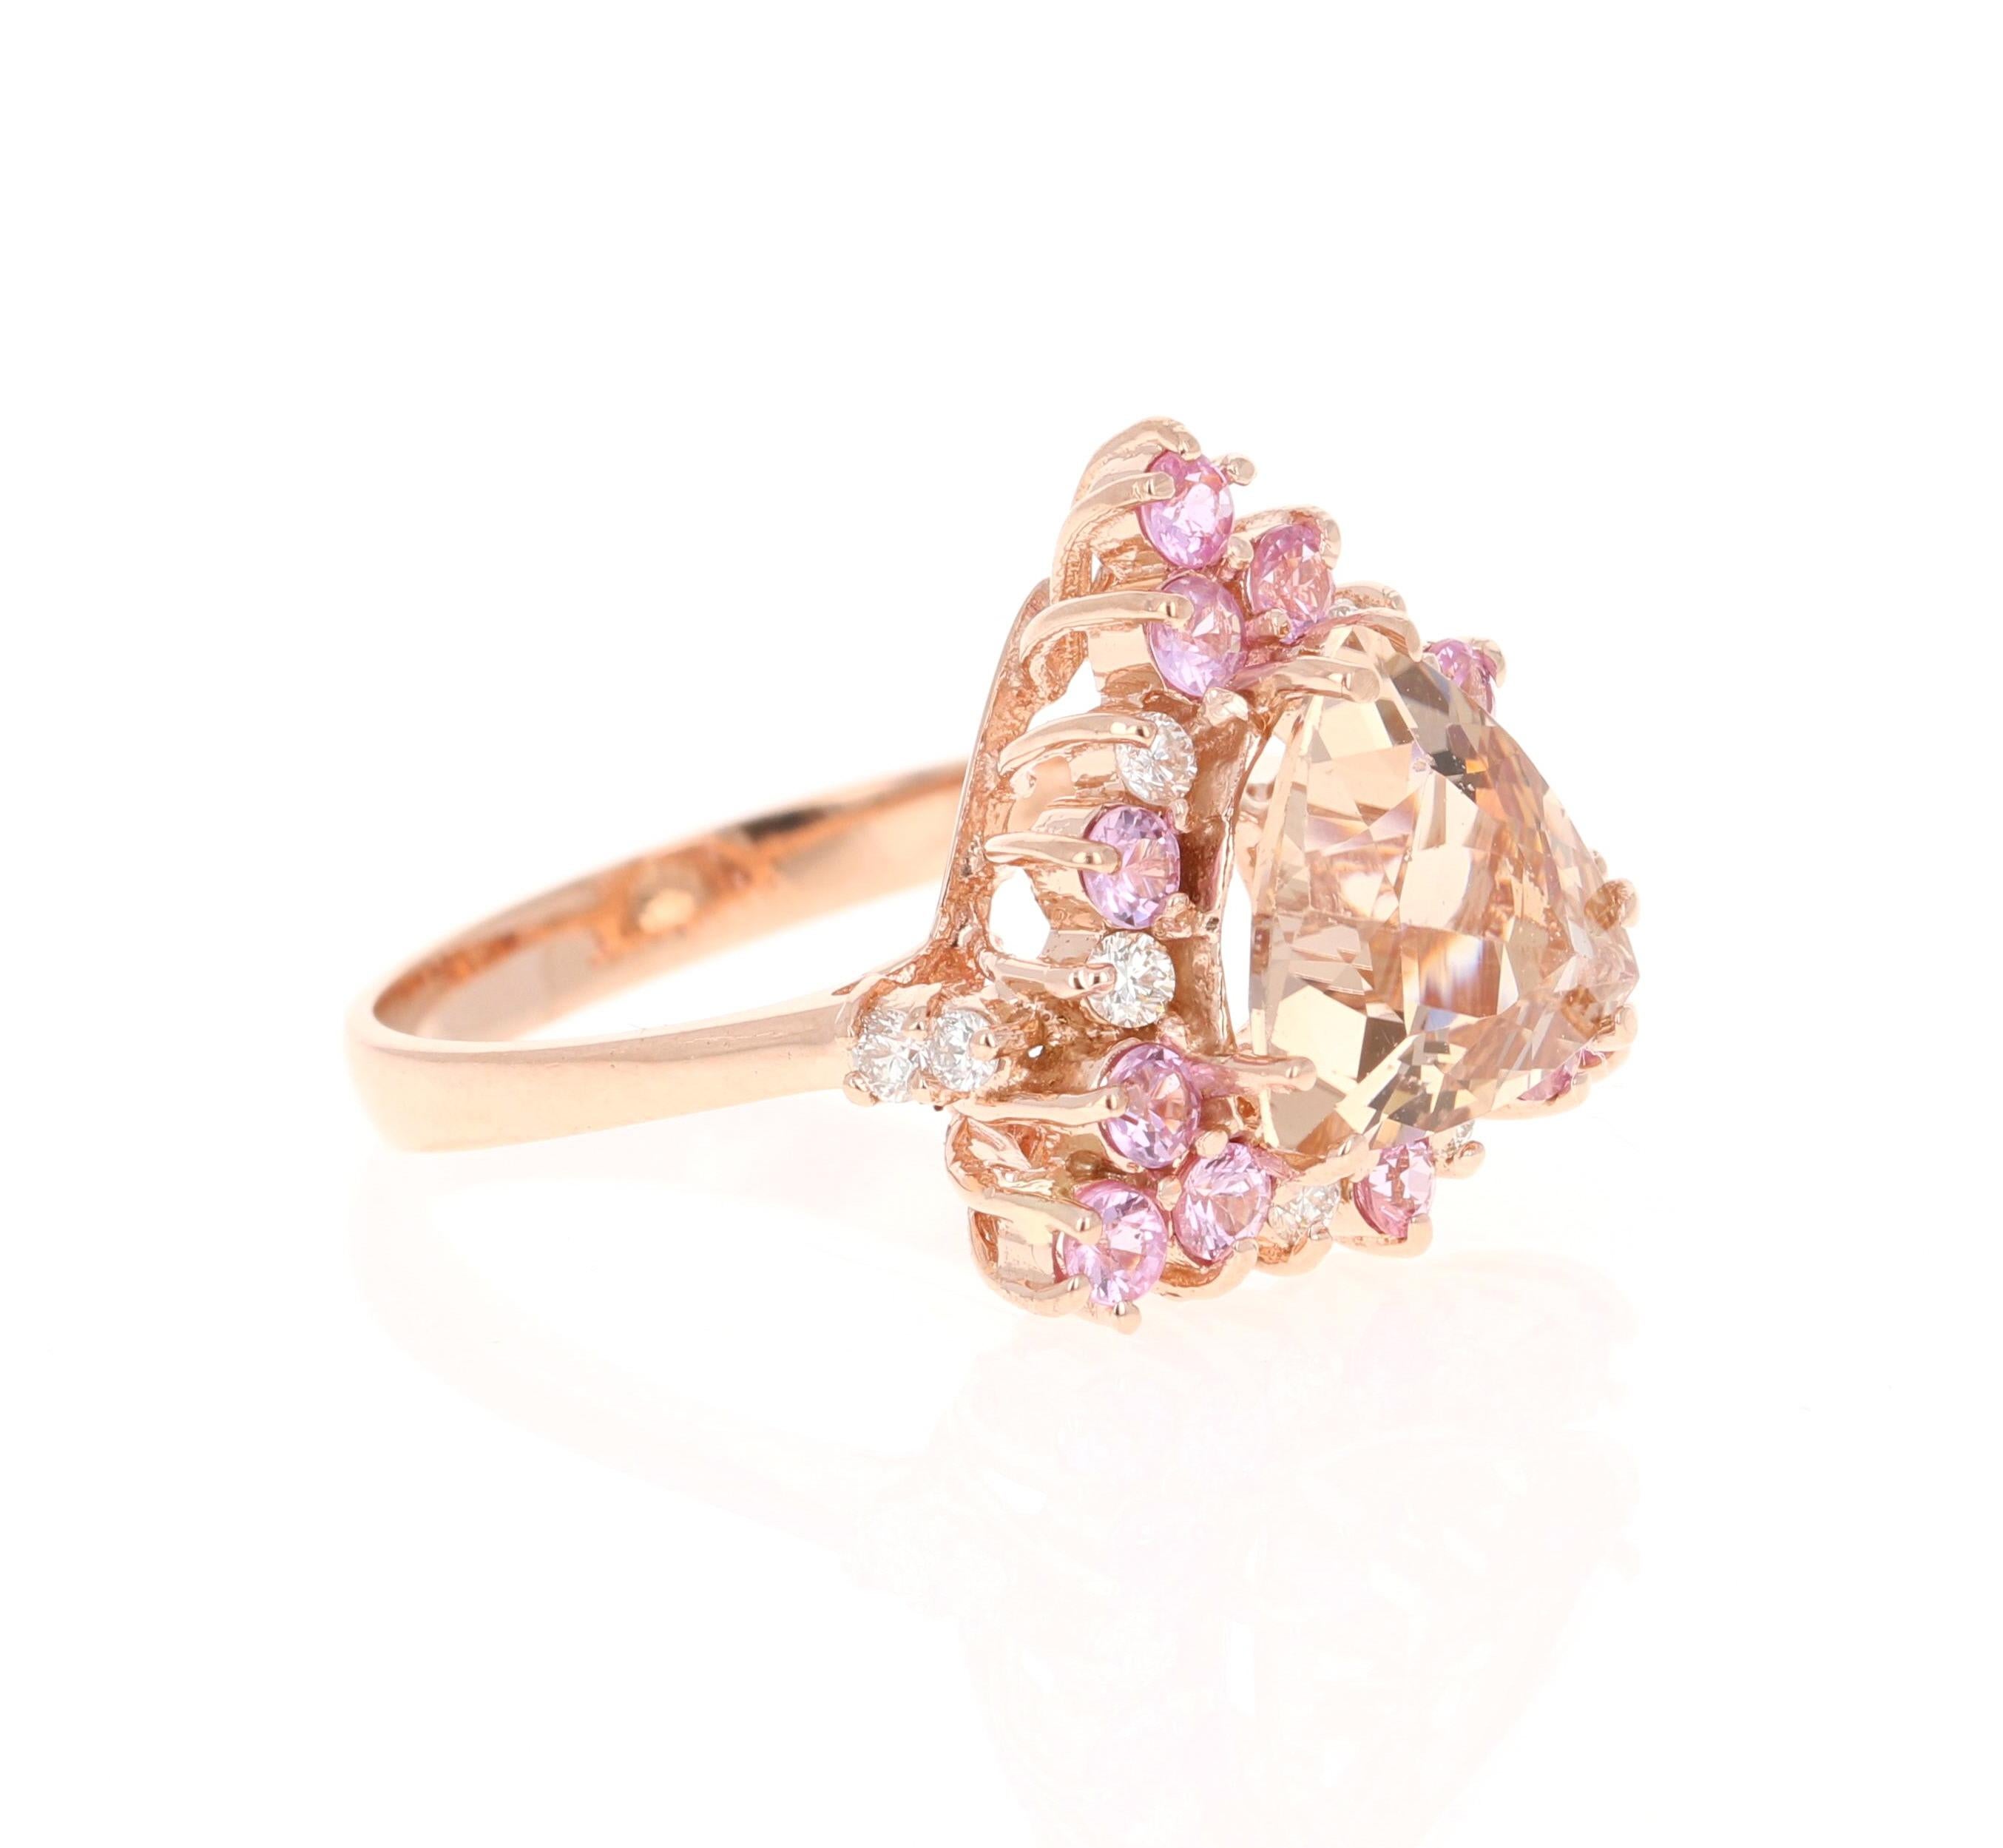 This ring has a 2.28 carat Trillion Cut Morganite along with 12 Round Cut Pink Sapphires that weigh 0.73 carats. There are also 10 Round Cut Diamonds that weigh 0.26 carats. (Clarity: VS, Color: H)
The total carat weight of the ring is 3.27